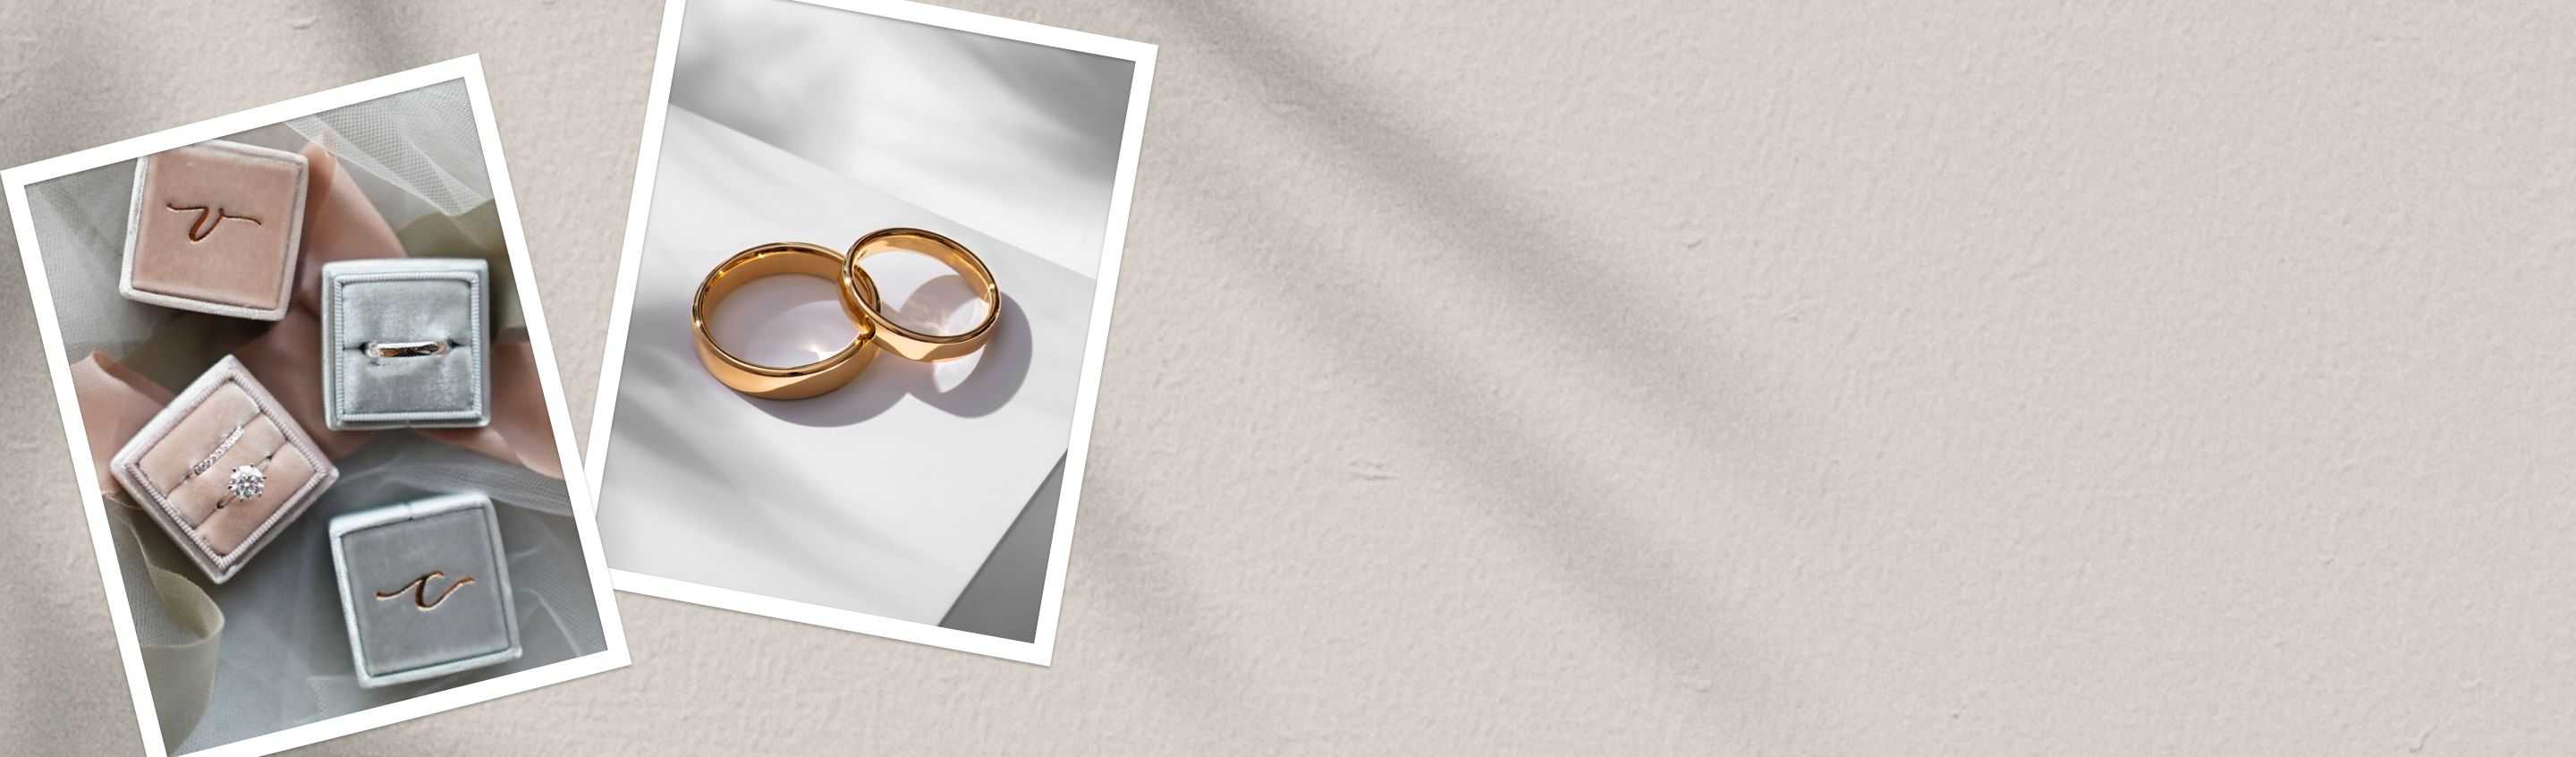 Two images, one of wedding ring boxes with rings inside and one image of two wedding rings, one women's ring and one men's ring in rose gold.